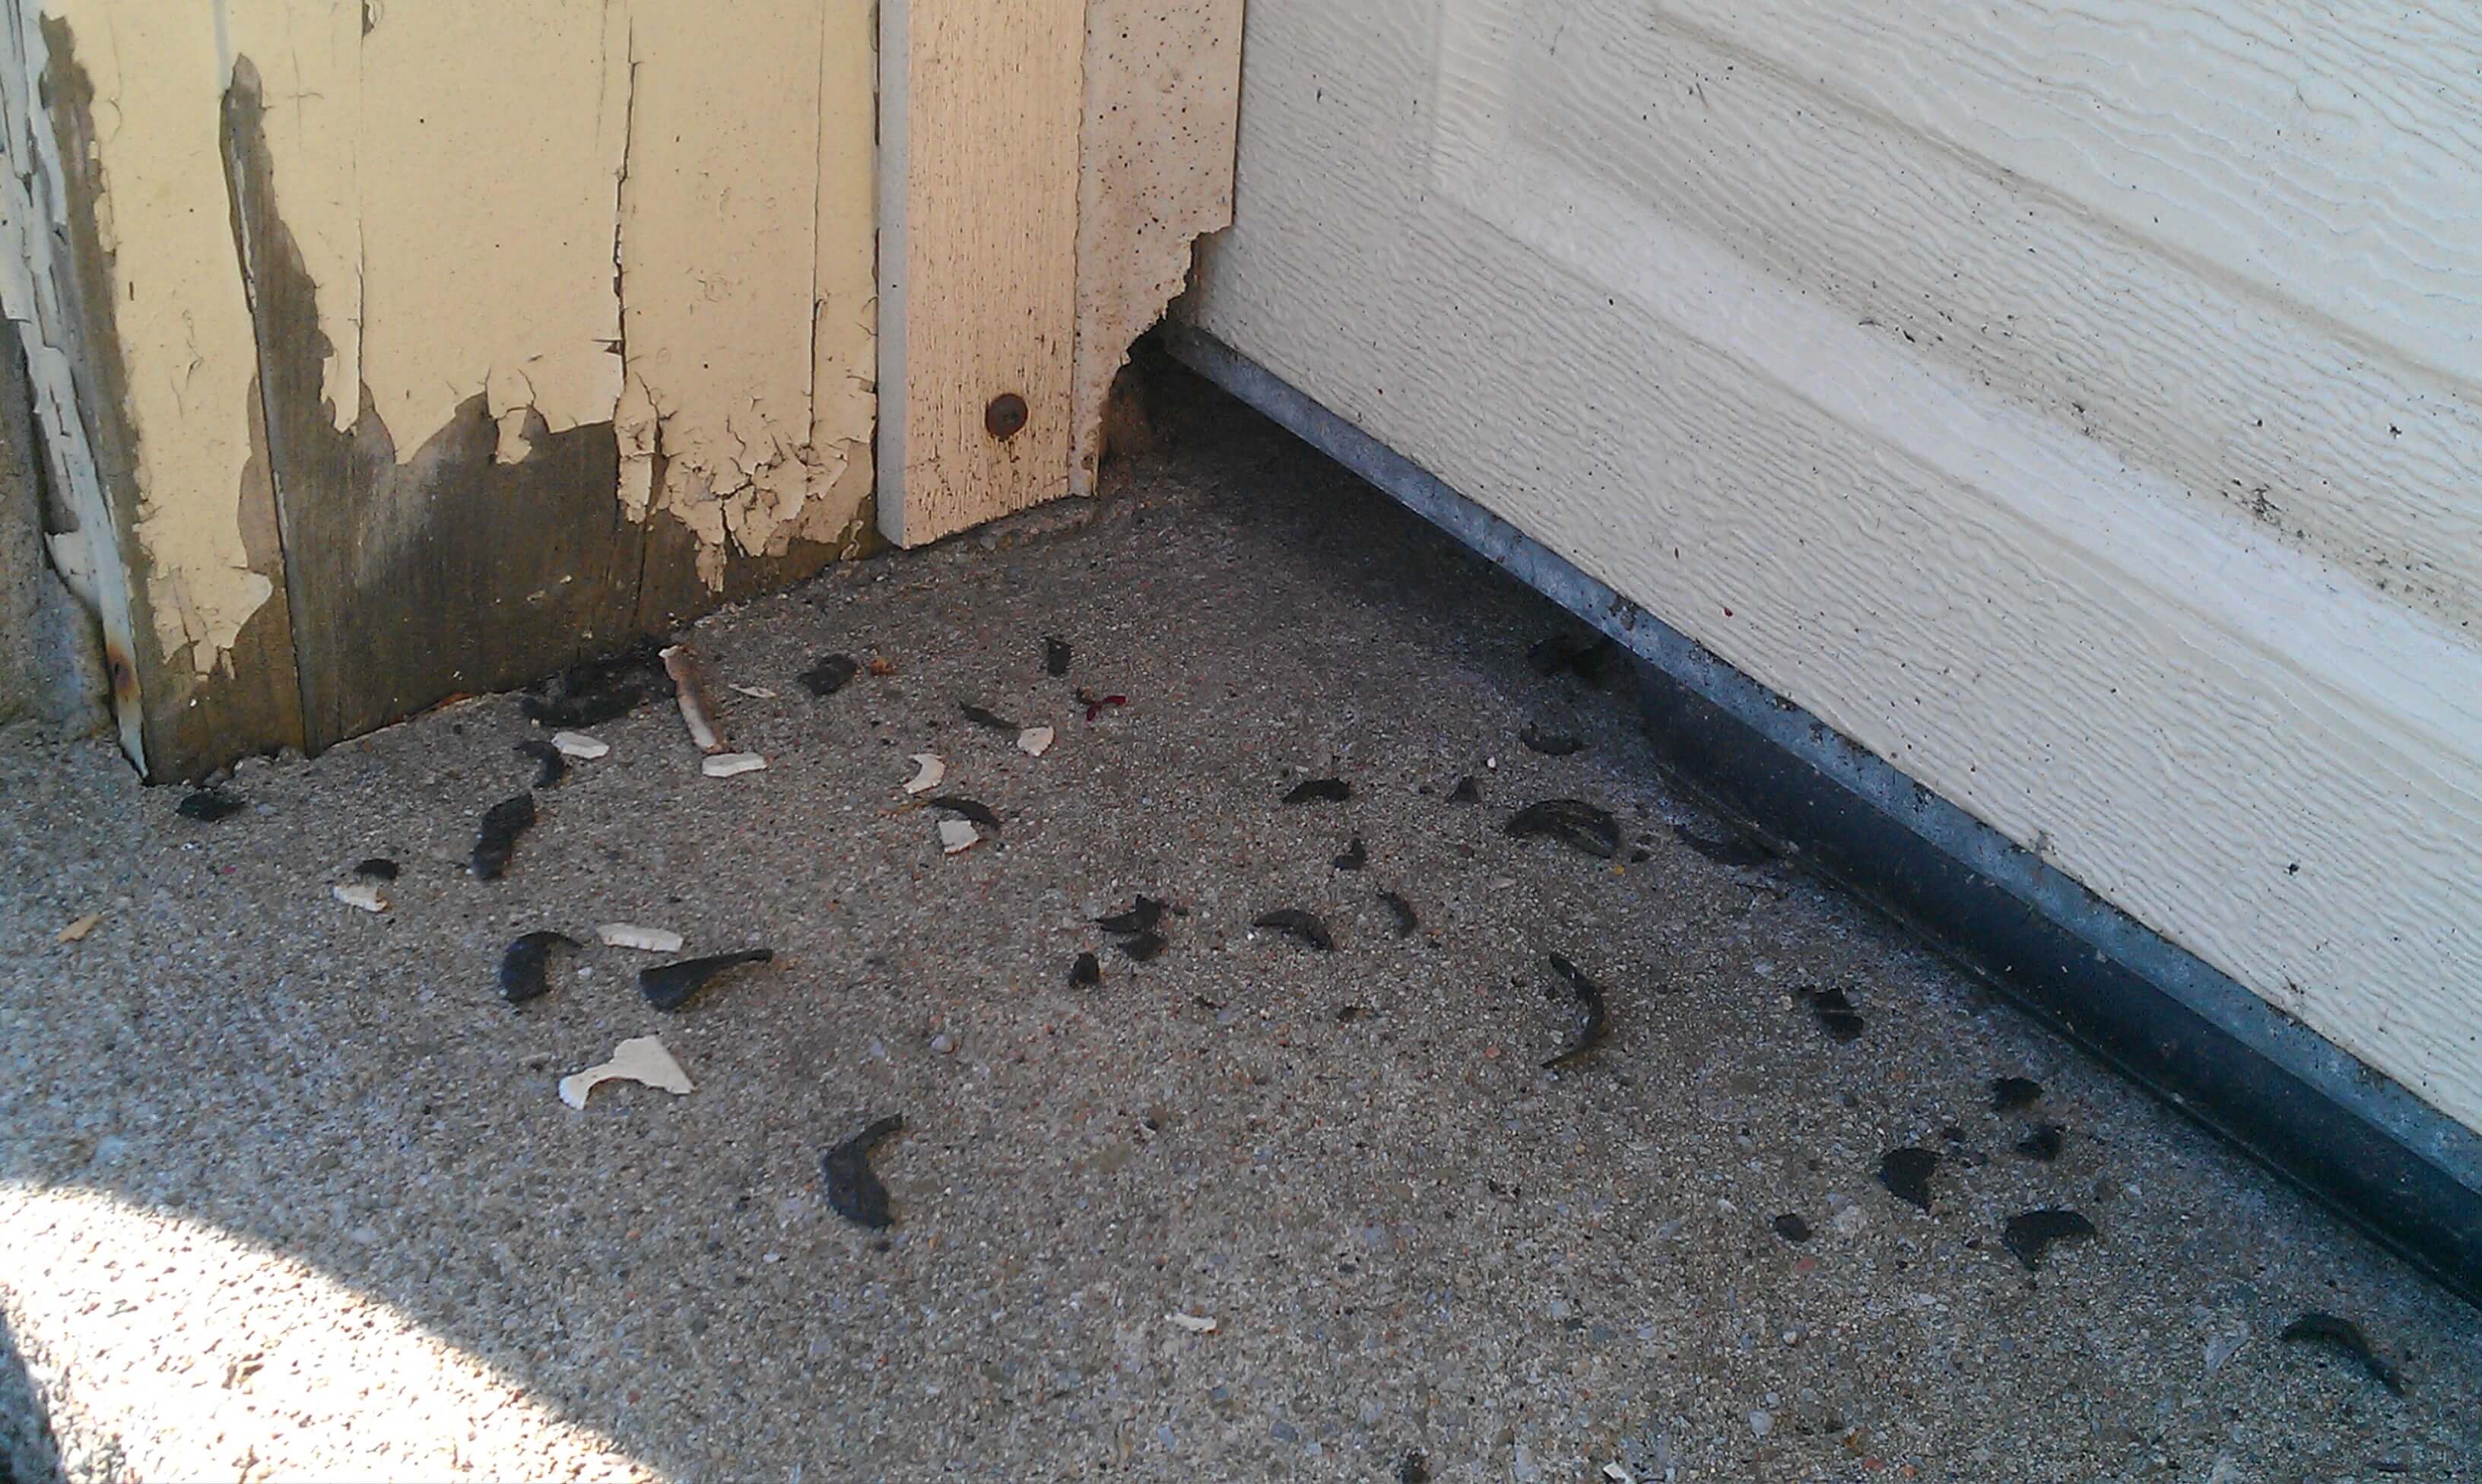 Achieve Mice Removal By Making Garage, How To Keep Mice From Eating Garage Door Seal